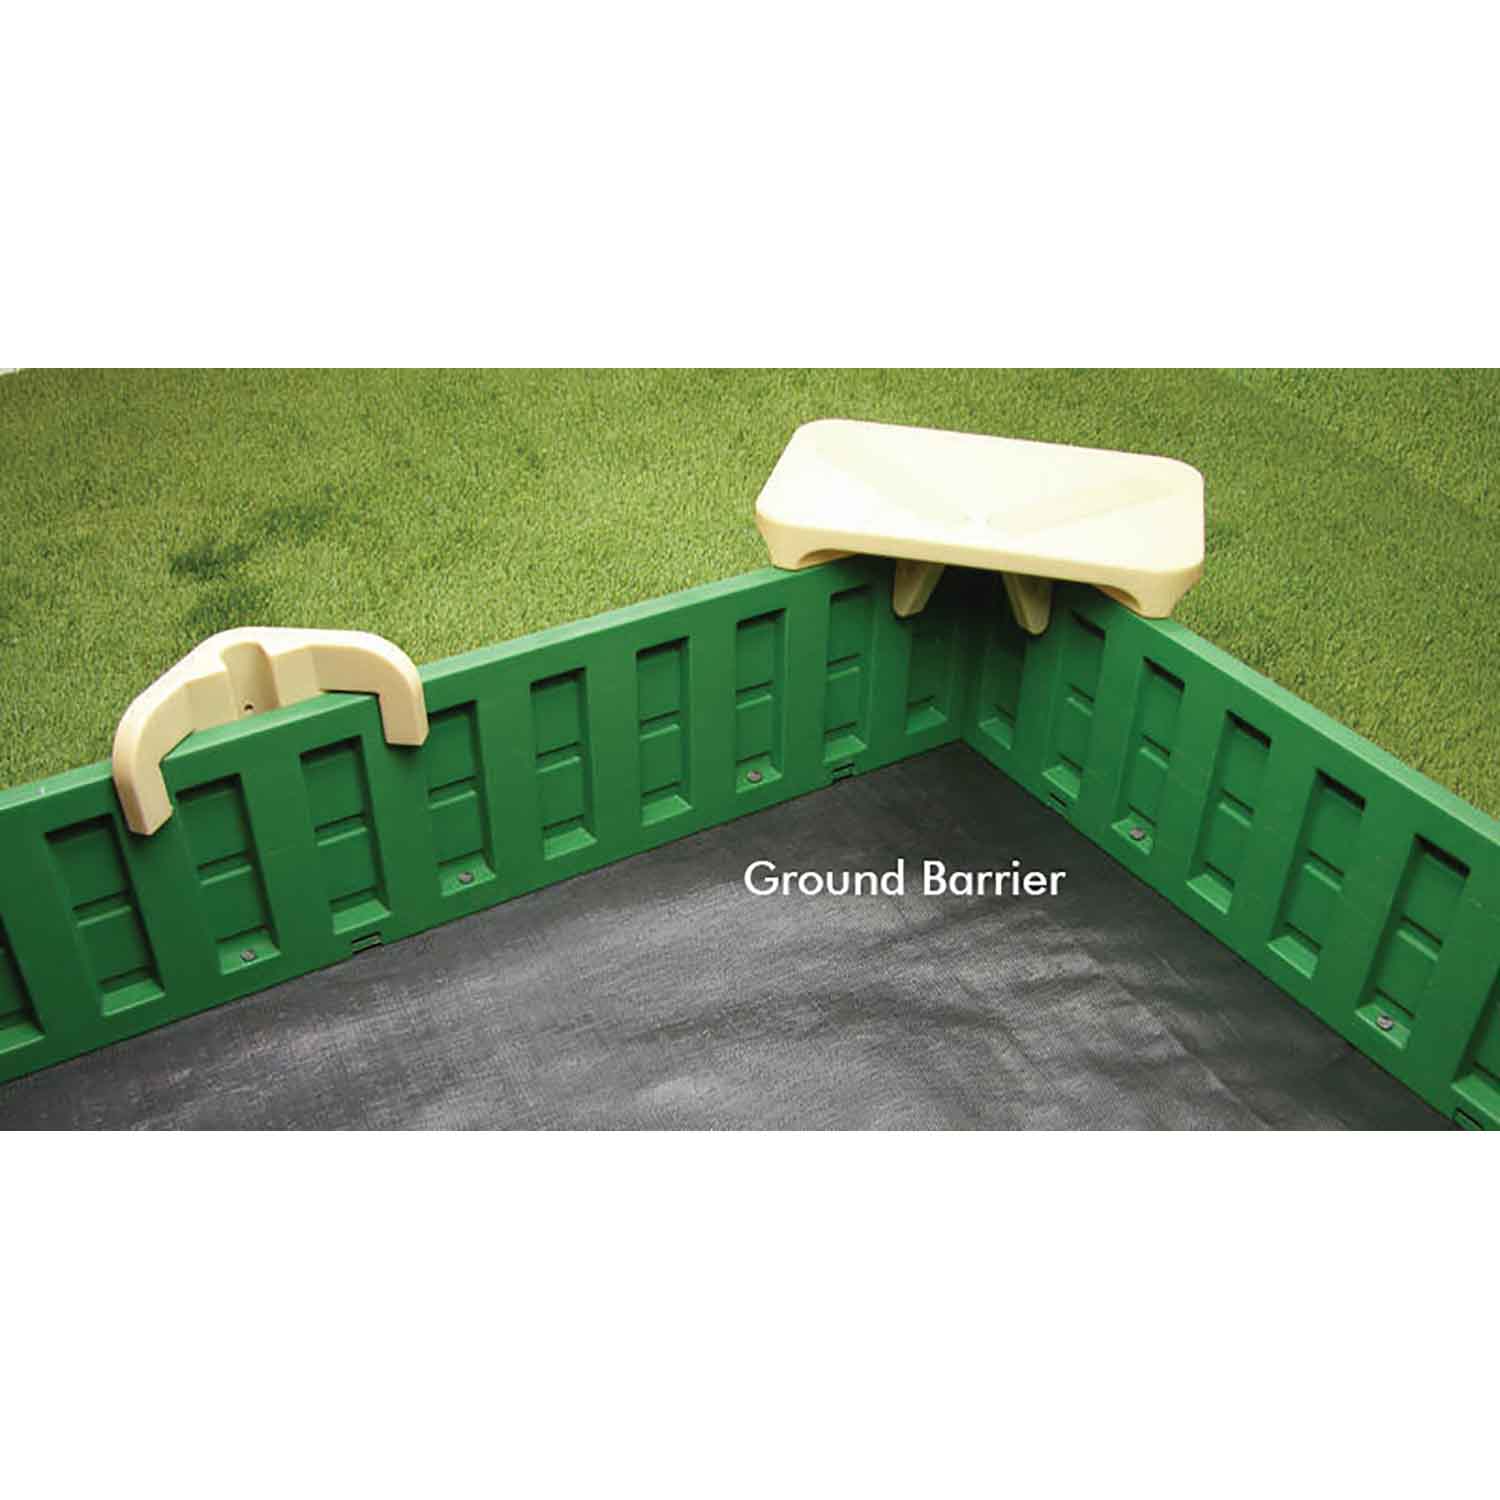 Sandlock® Sandboxes with Cover